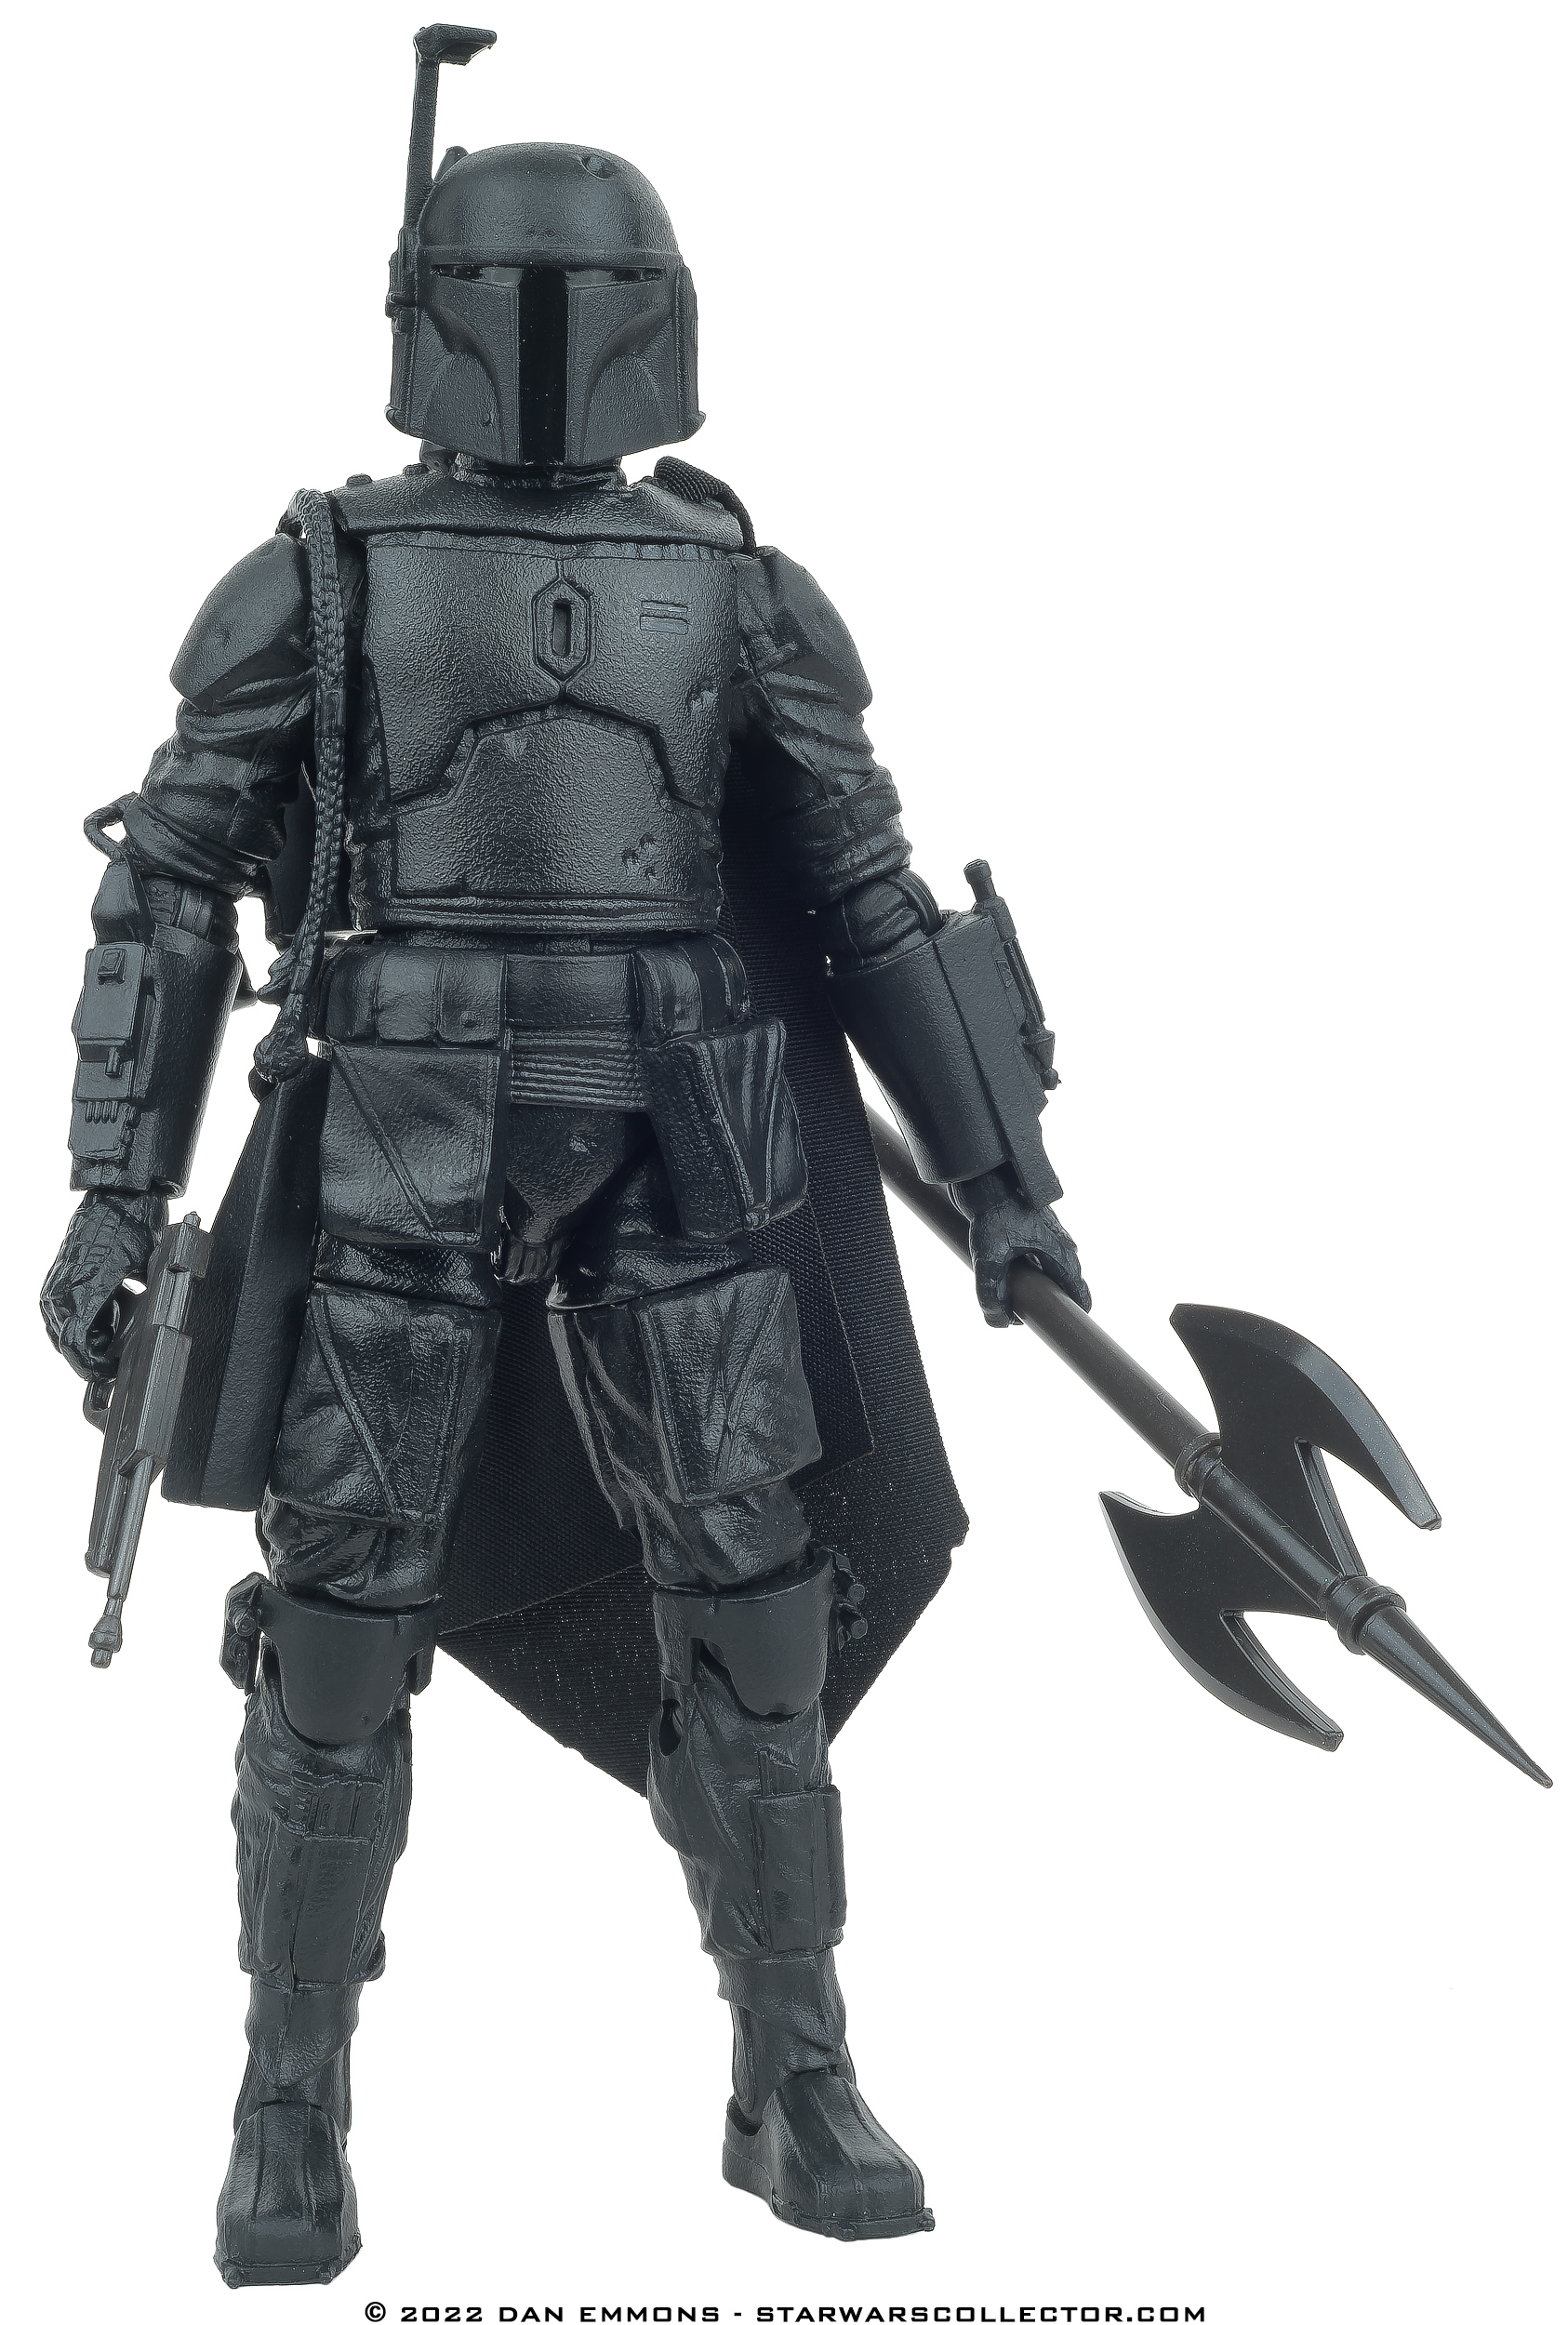 The Black Series 6-Inch - San Diego Comic Con Exclusive - Expanded Universe - Comic Set - Boba Fett (In Disguise)